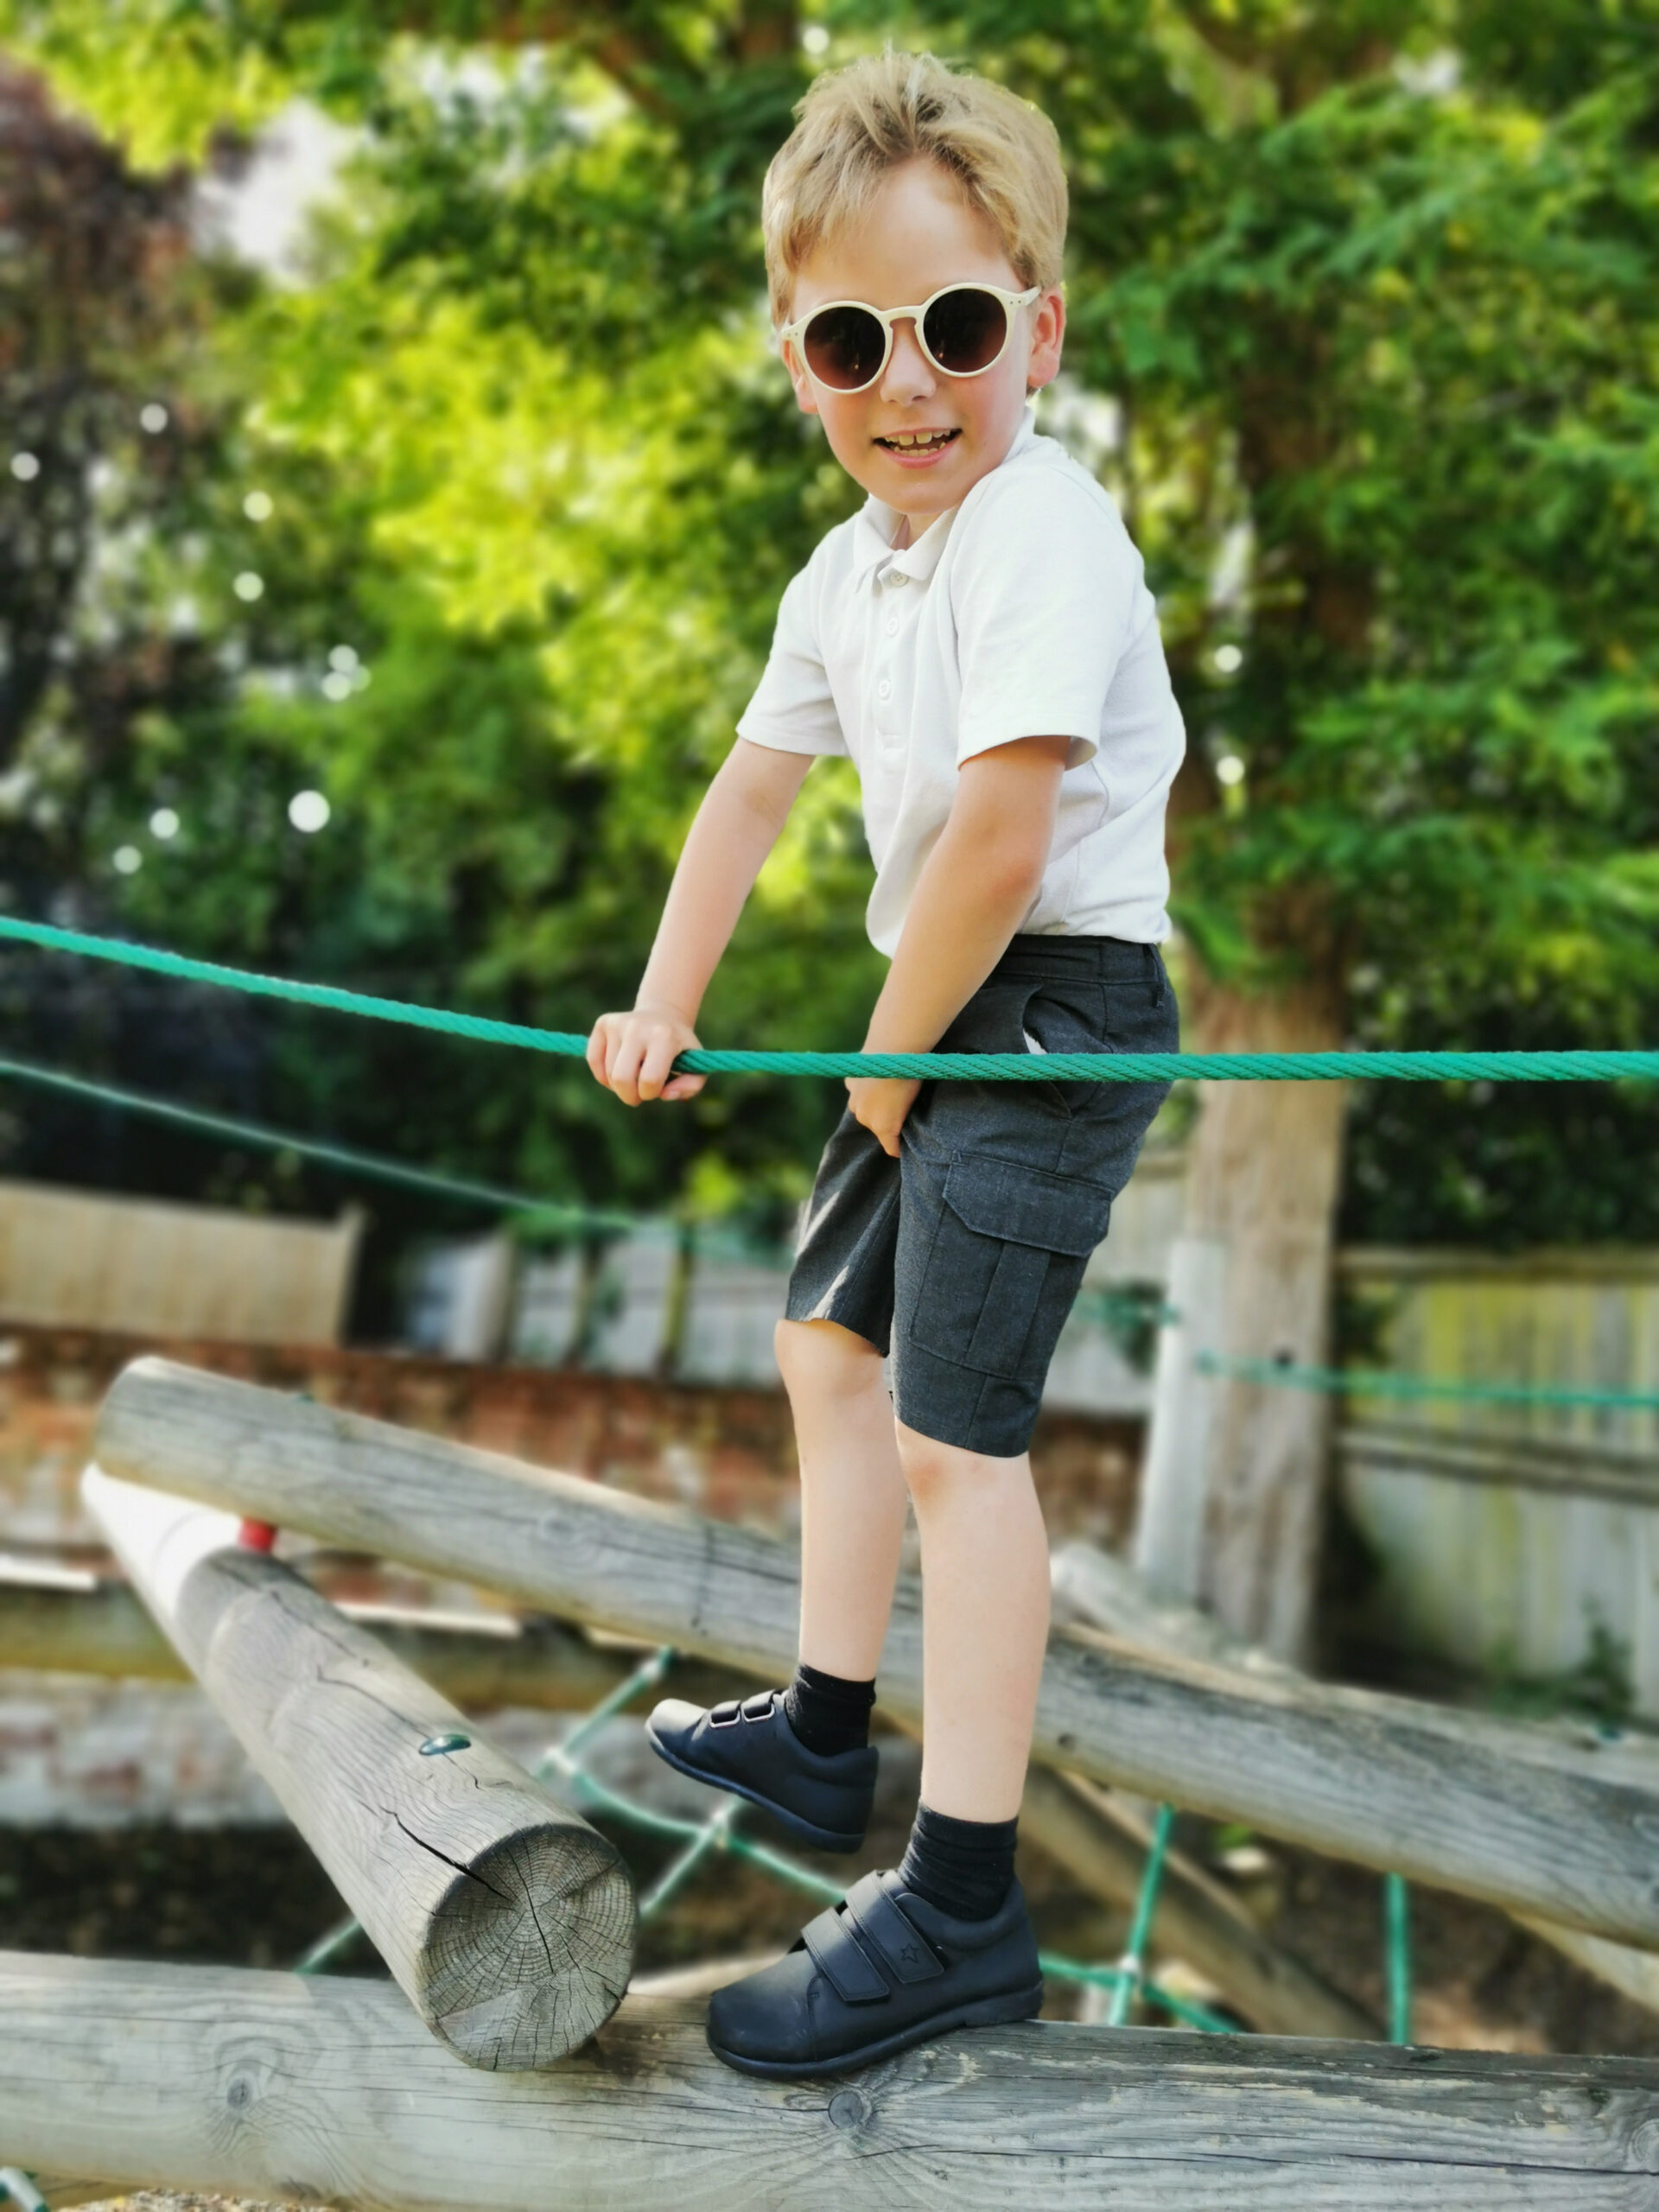 Zig+Star School Shoes, Zig+Star Shoes, School Shoes, School Ready, School Uniform, Good-To-Grow Midsoles, Sustainable Shoes, Unisex Kids' Shoes, Back To School Giveaway, Win, Competition, the Frenchie Mummy, Planet-Conscious Shoes, Sustainably Designed Kids Shoes